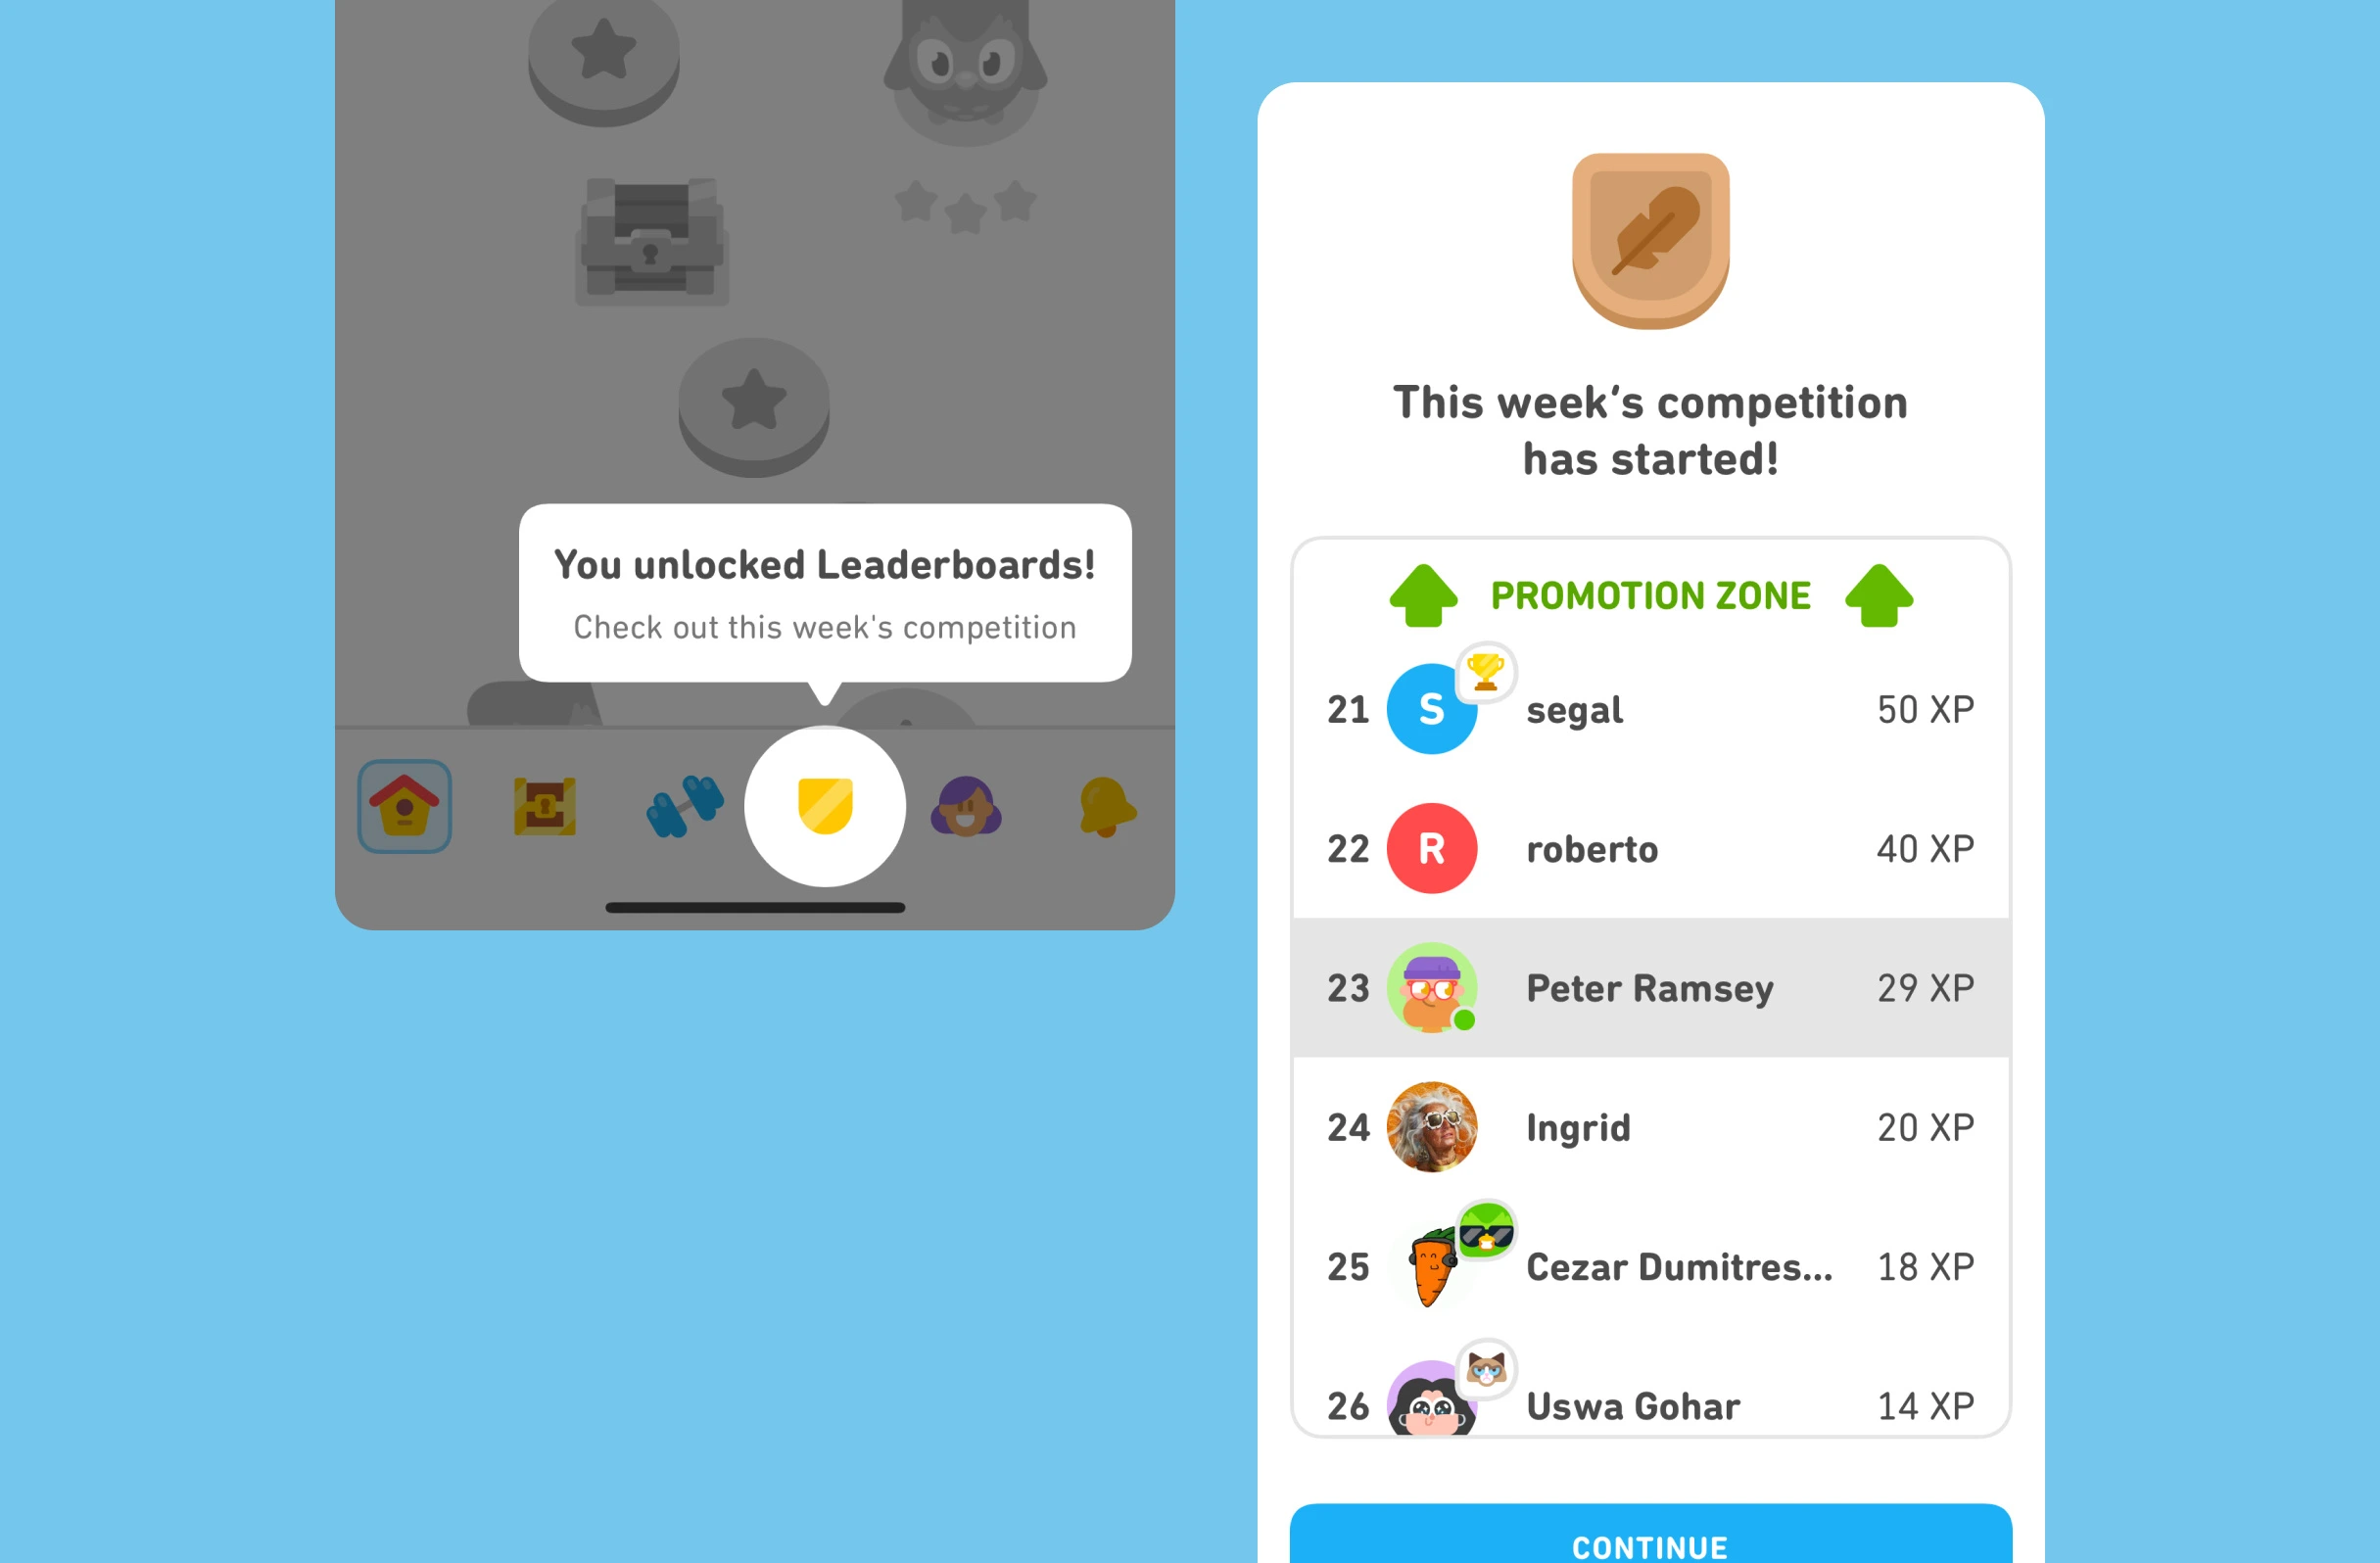 Leaderboards & the promotion zone